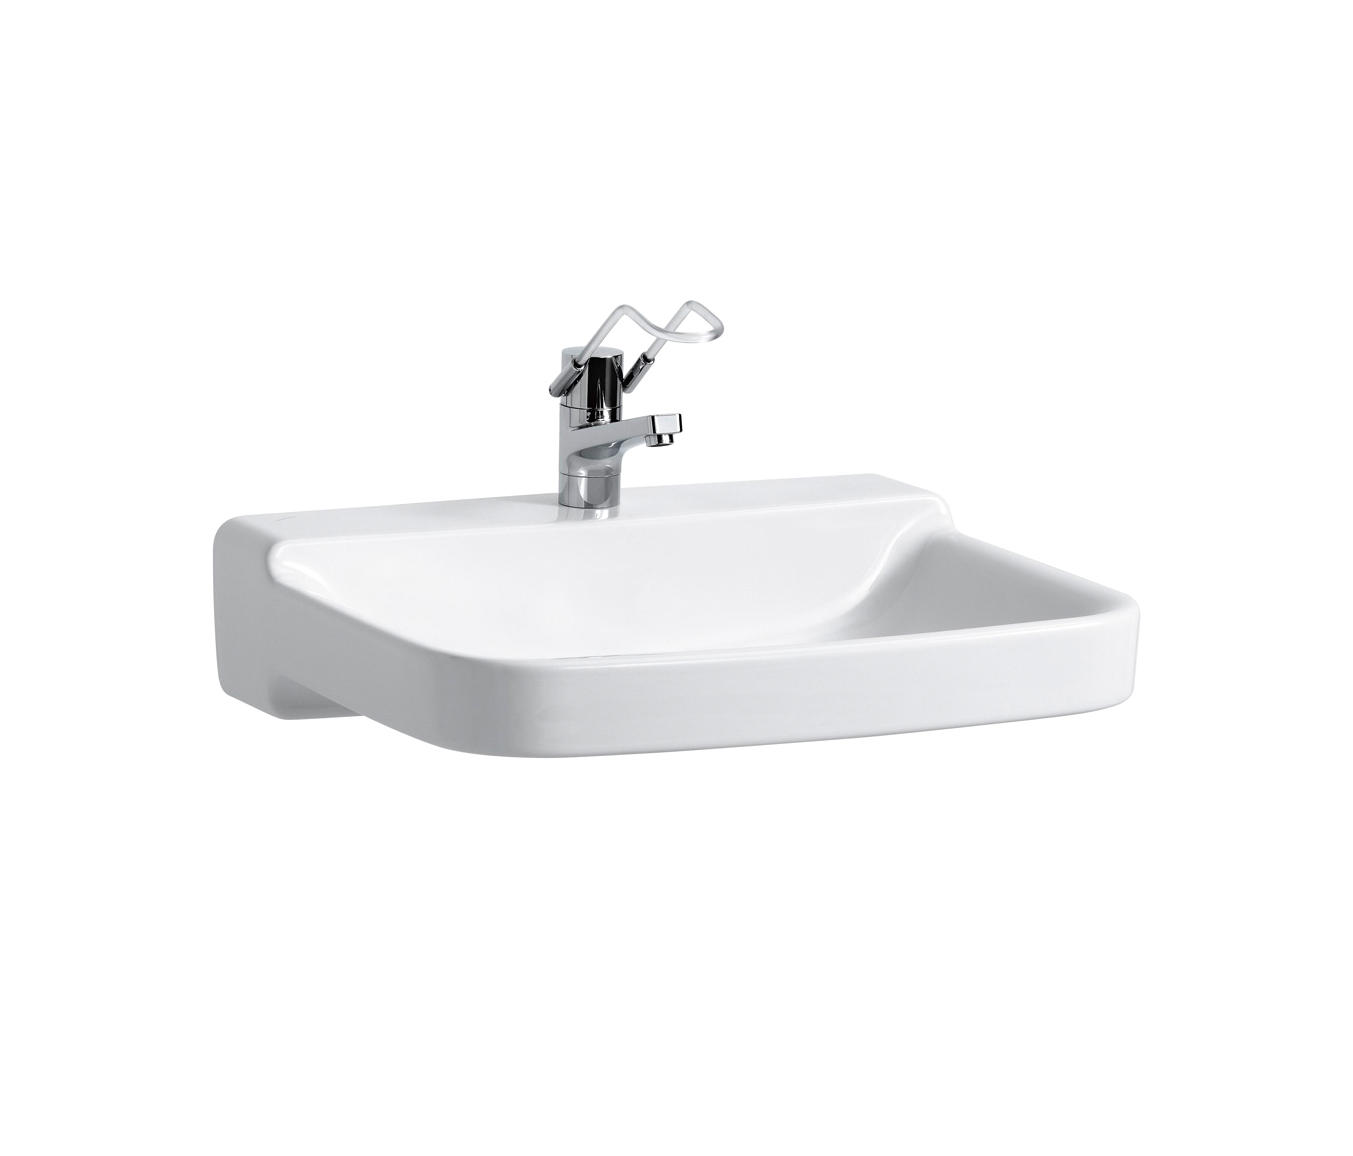 Laufen Pro A Washstand 8179530001041 65 X 48 Cm White With Overflow 1 Cock Hole